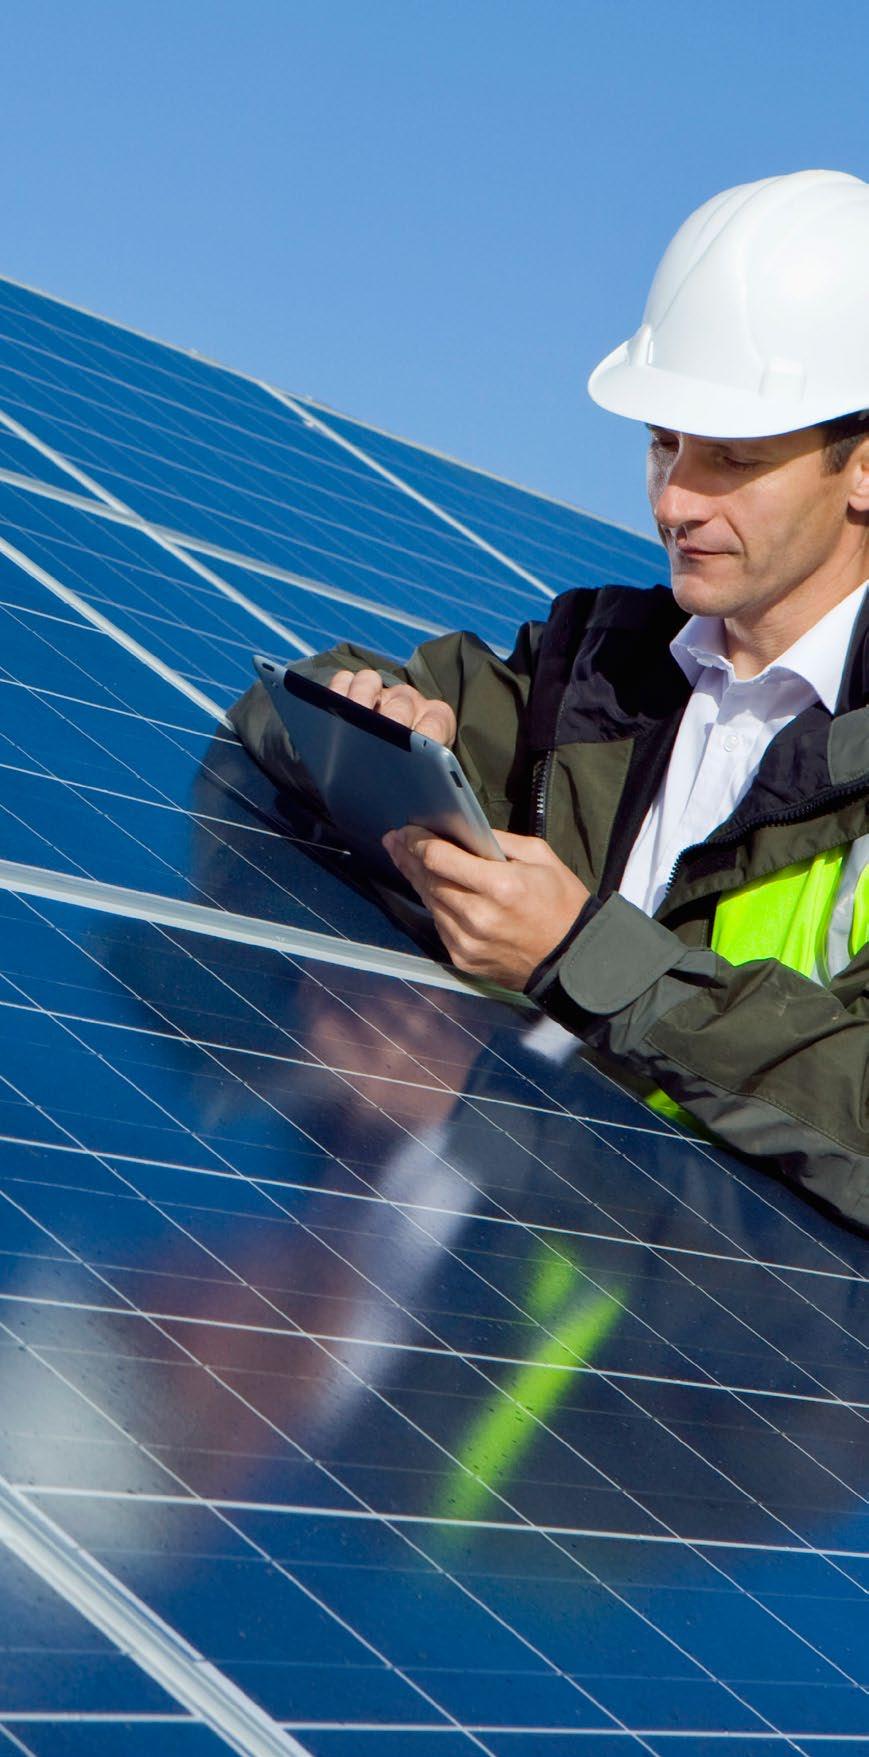 SunPower Corporation Extending talent management to the next level To manage its growing contingent labor needs, SunPower is looking to SAP Fieldglass solutions to help manage and onboard temporary